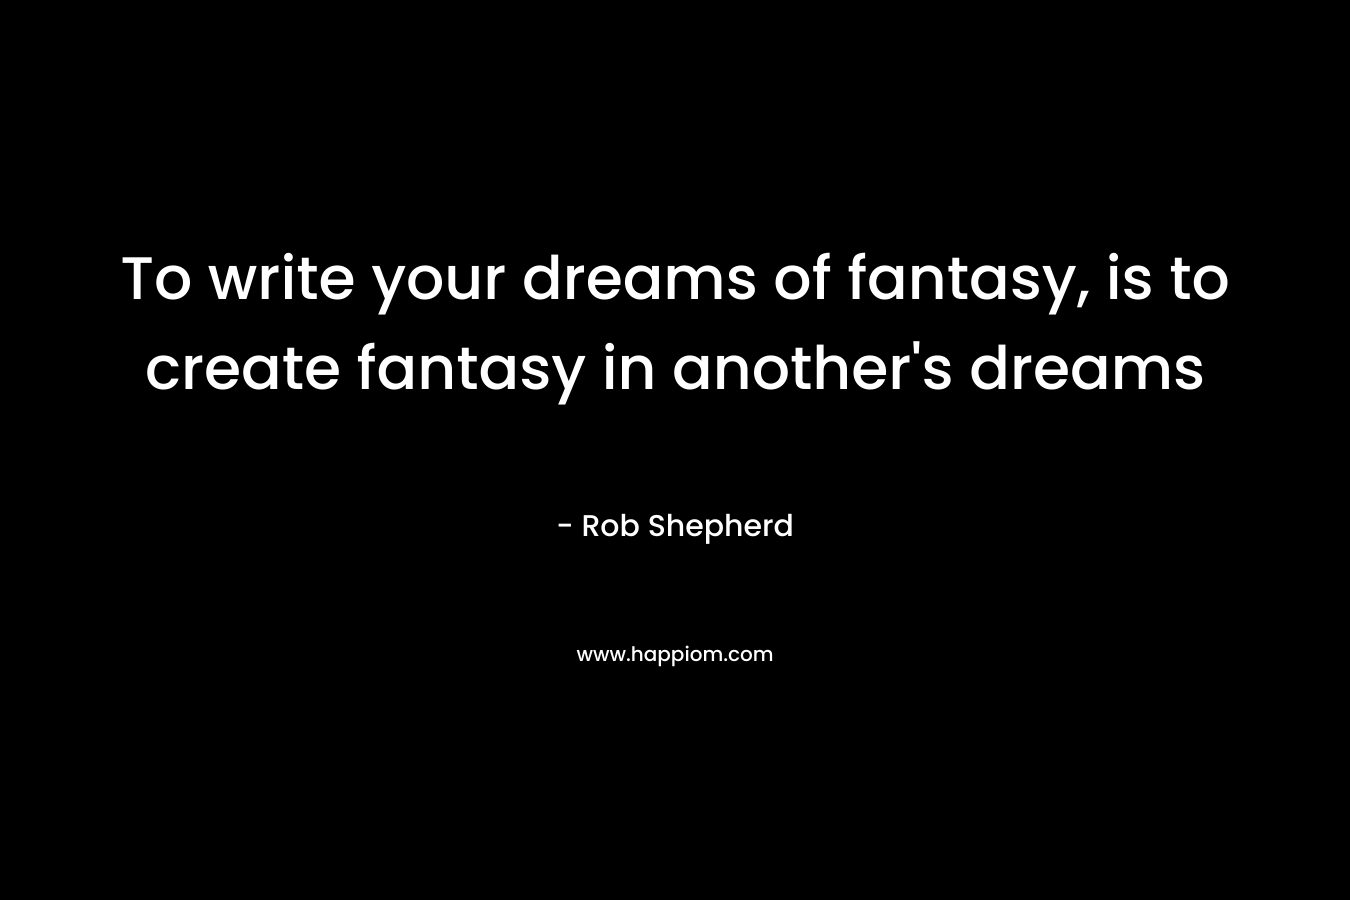 To write your dreams of fantasy, is to create fantasy in another’s dreams – Rob Shepherd